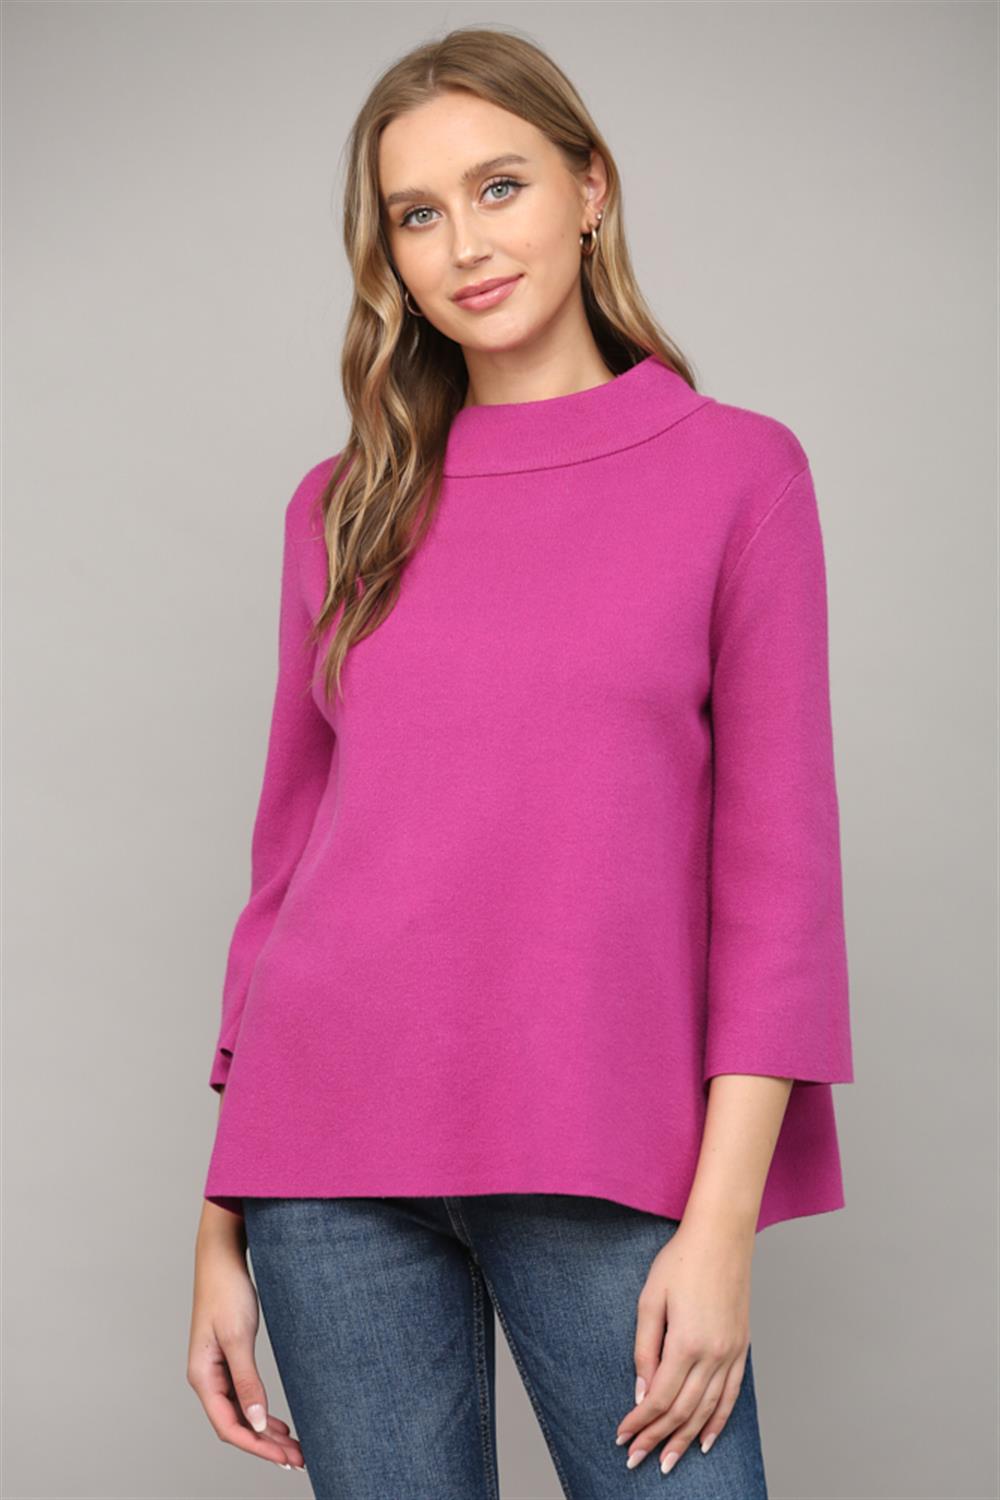 Fate Bell Sleeve Sweater